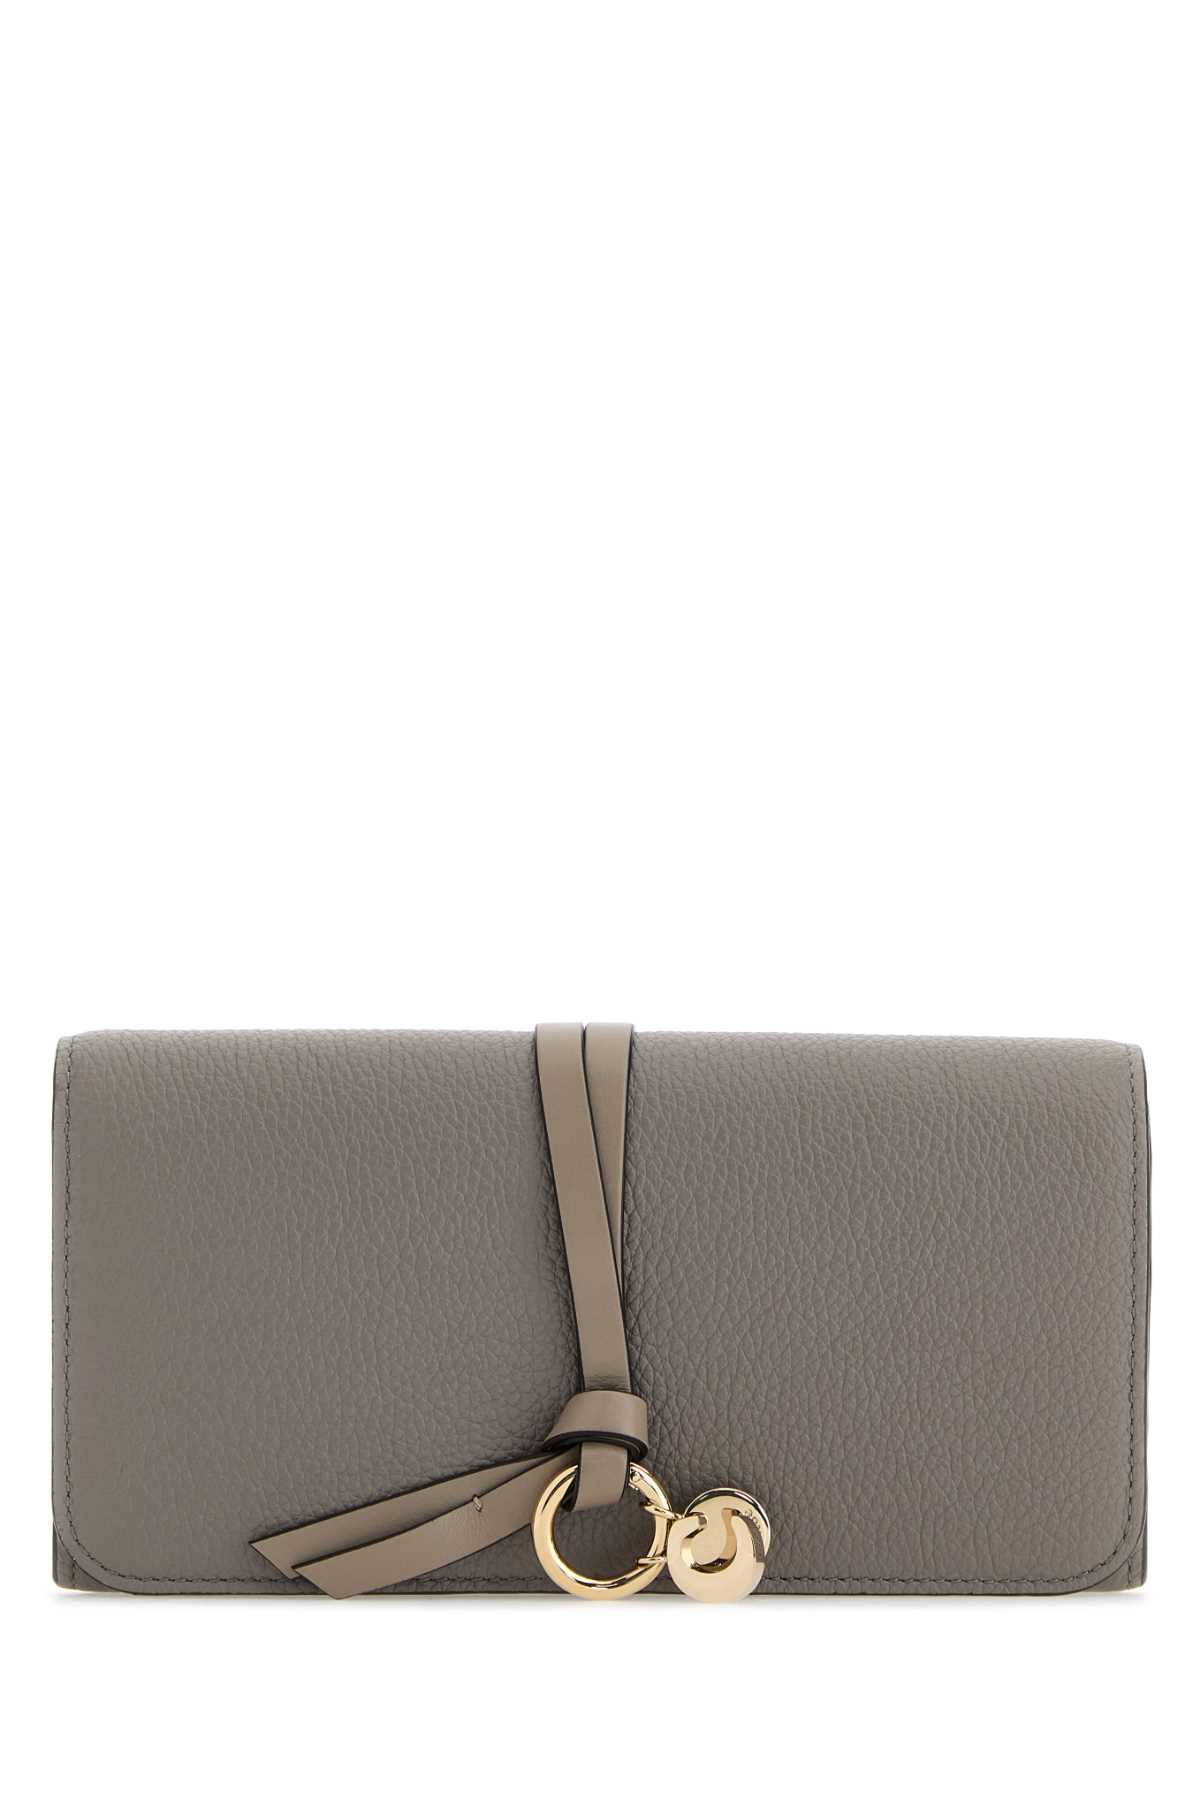 Chloé Dove Grey Leather Alphabet Wallet In 053